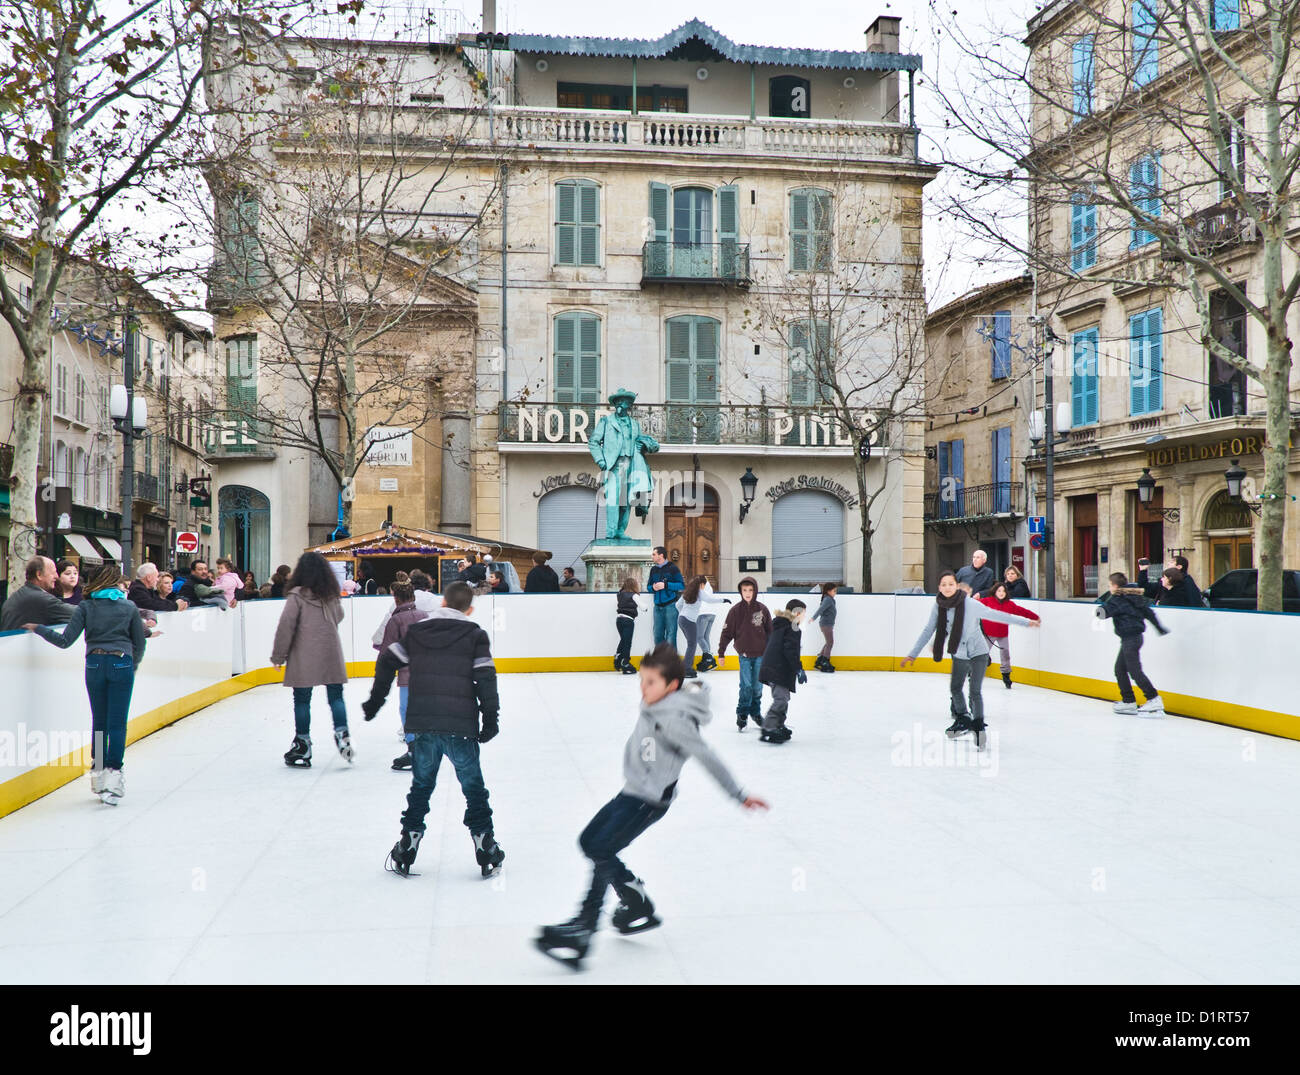 Ice skating at the Arles market ice rink in Southern France Stock Photo -  Alamy